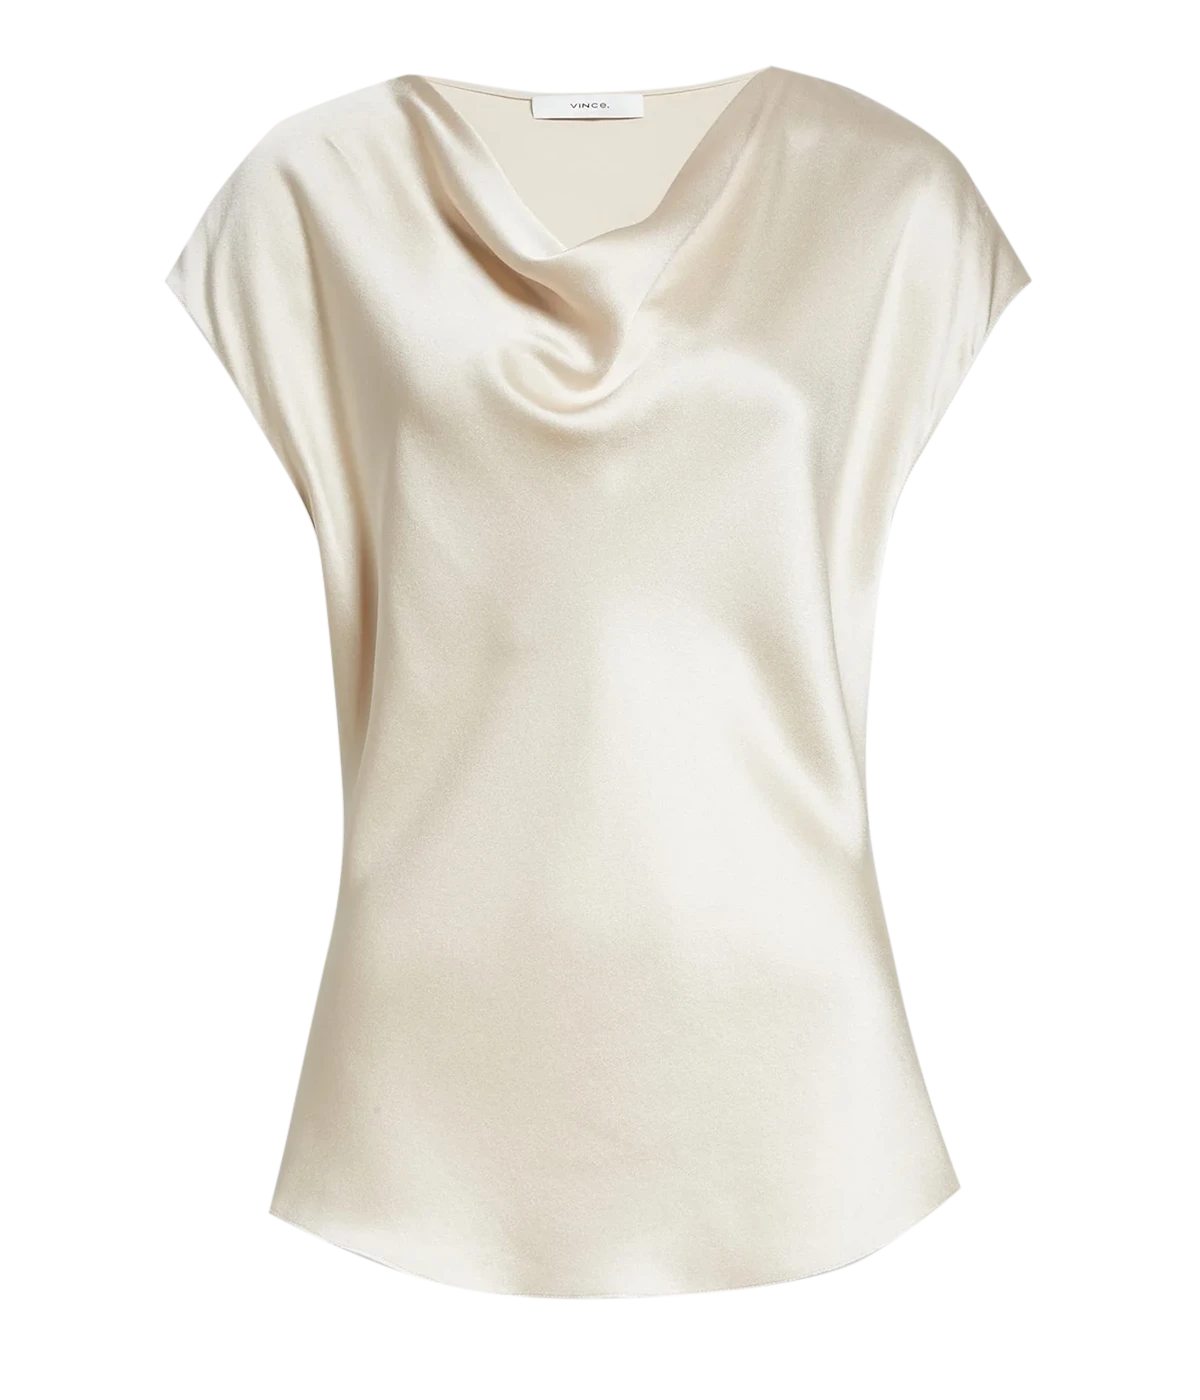 Cowl Neck Cap Sleeve Blouse in Champagne